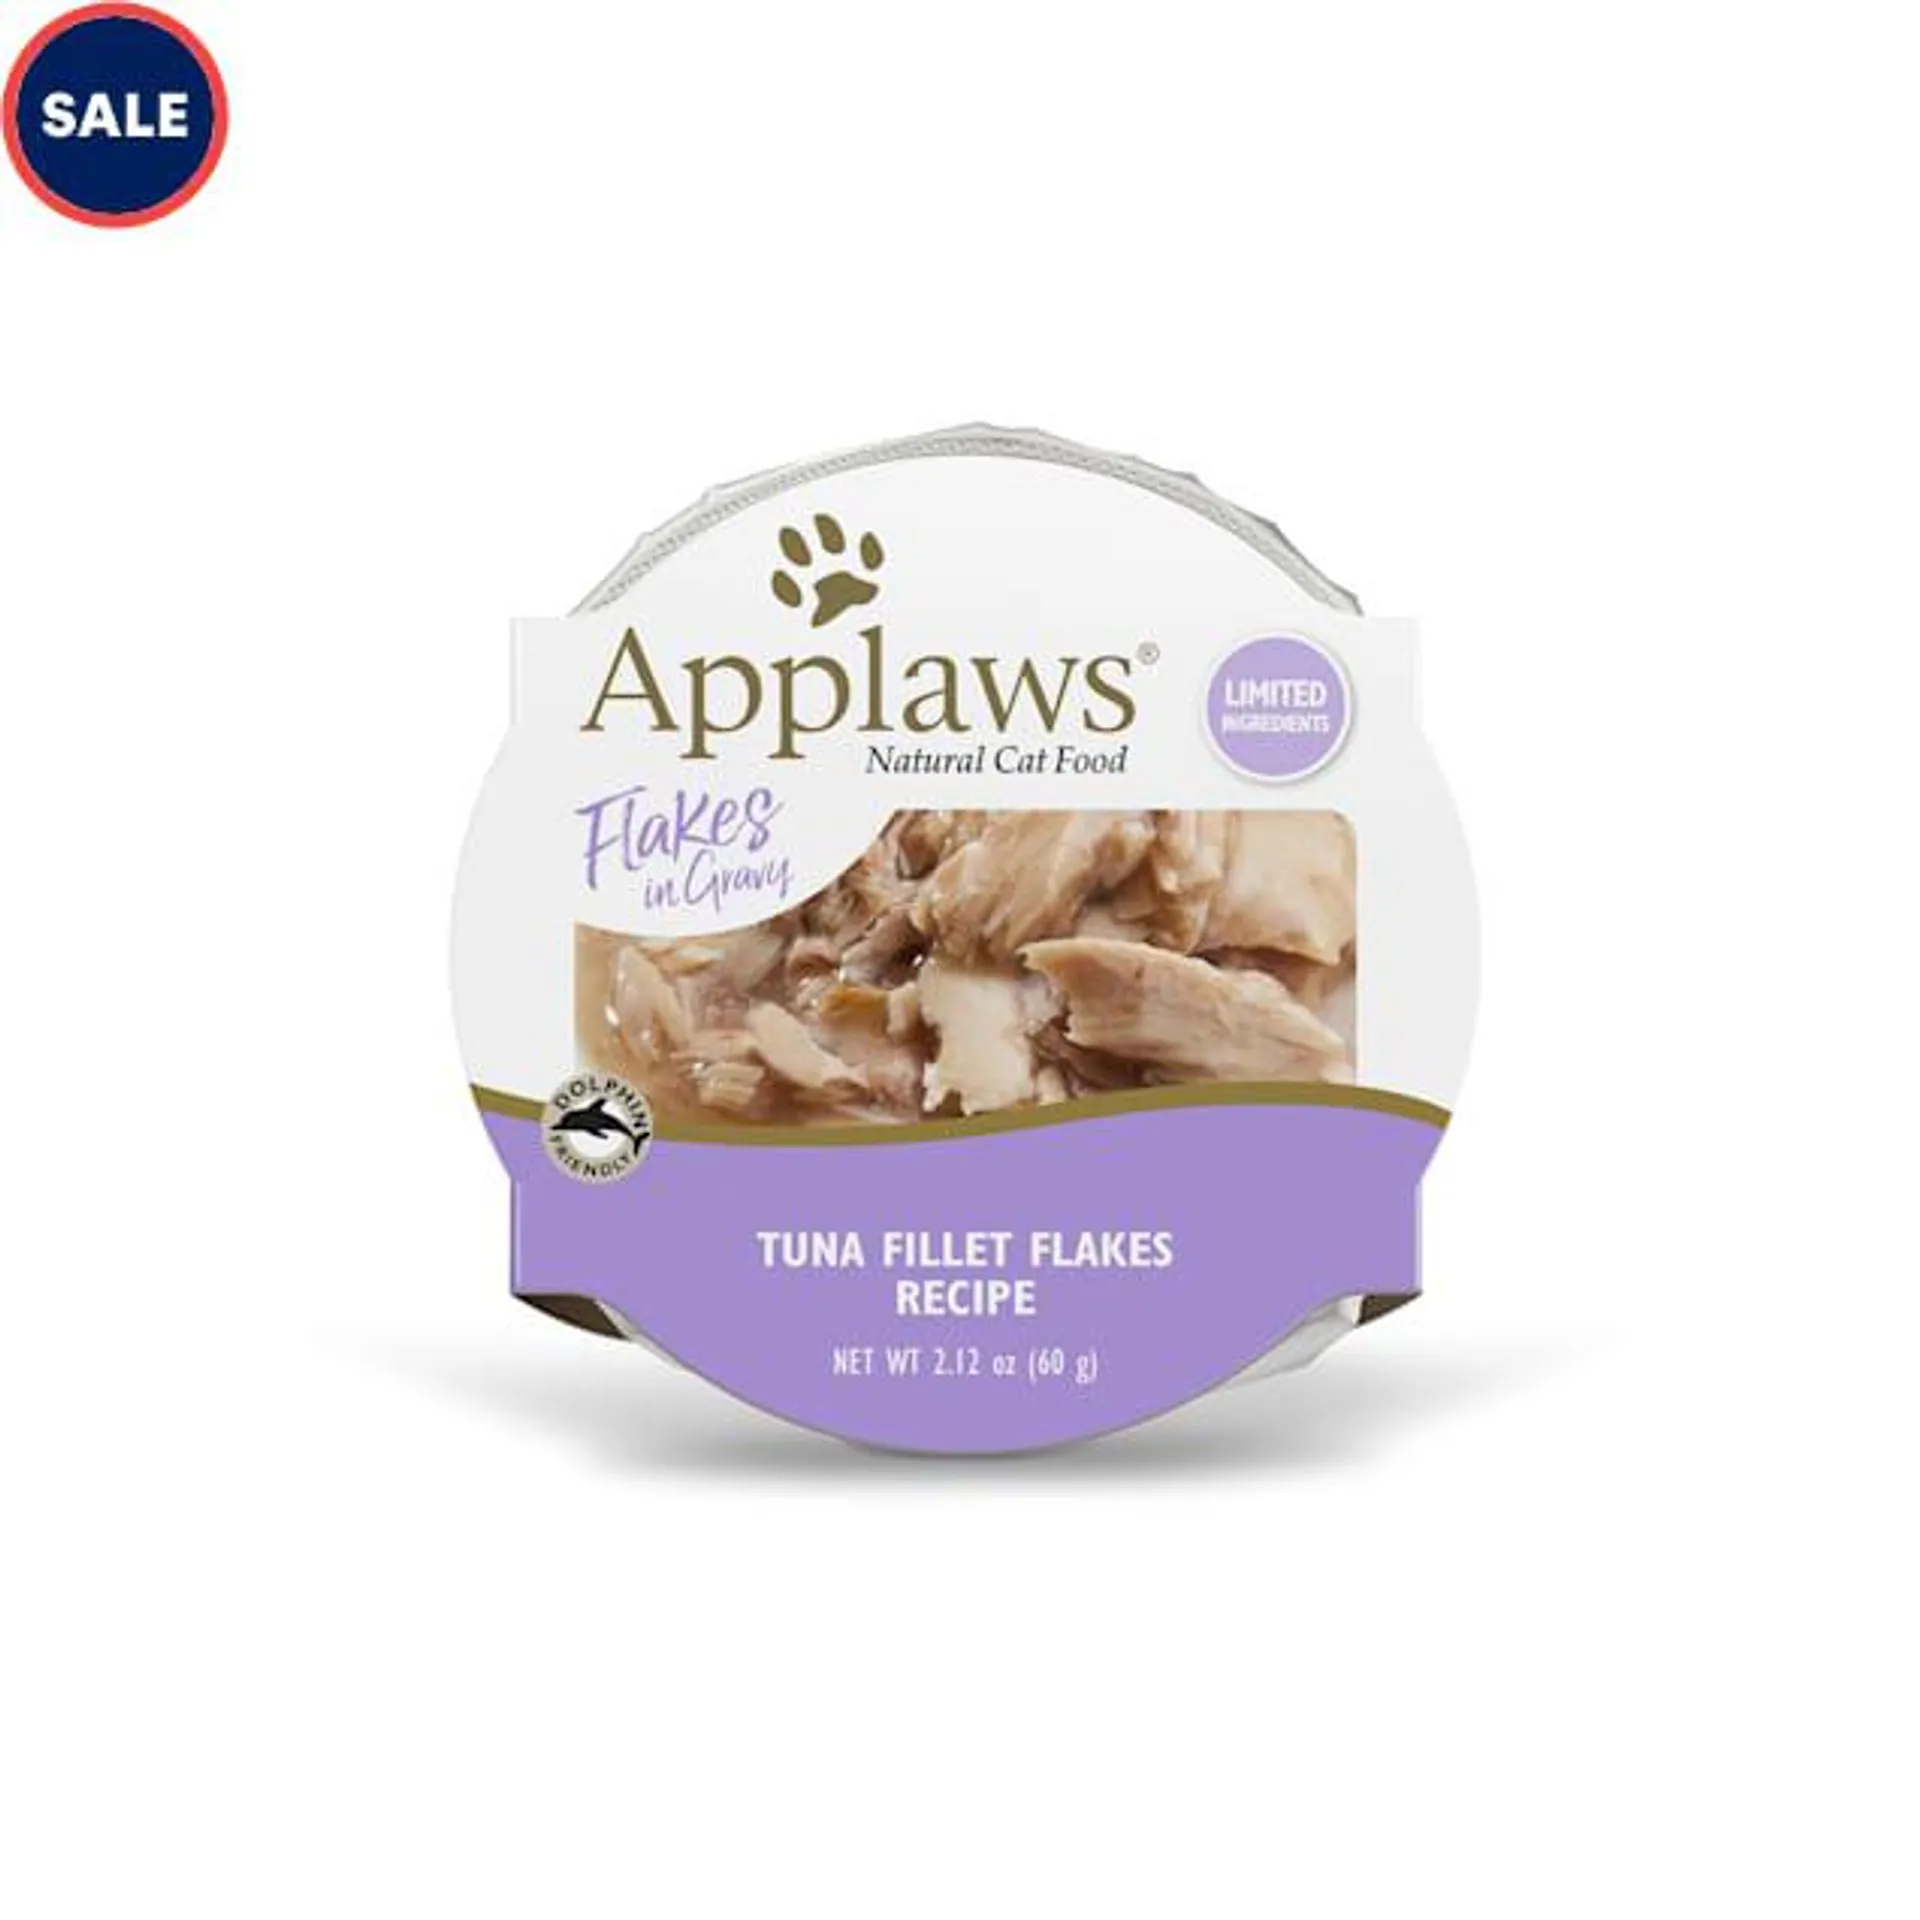 Applaws Natural Tuna Flakes in Gravy Wet Cat Food, 2.12 oz., Case of 18